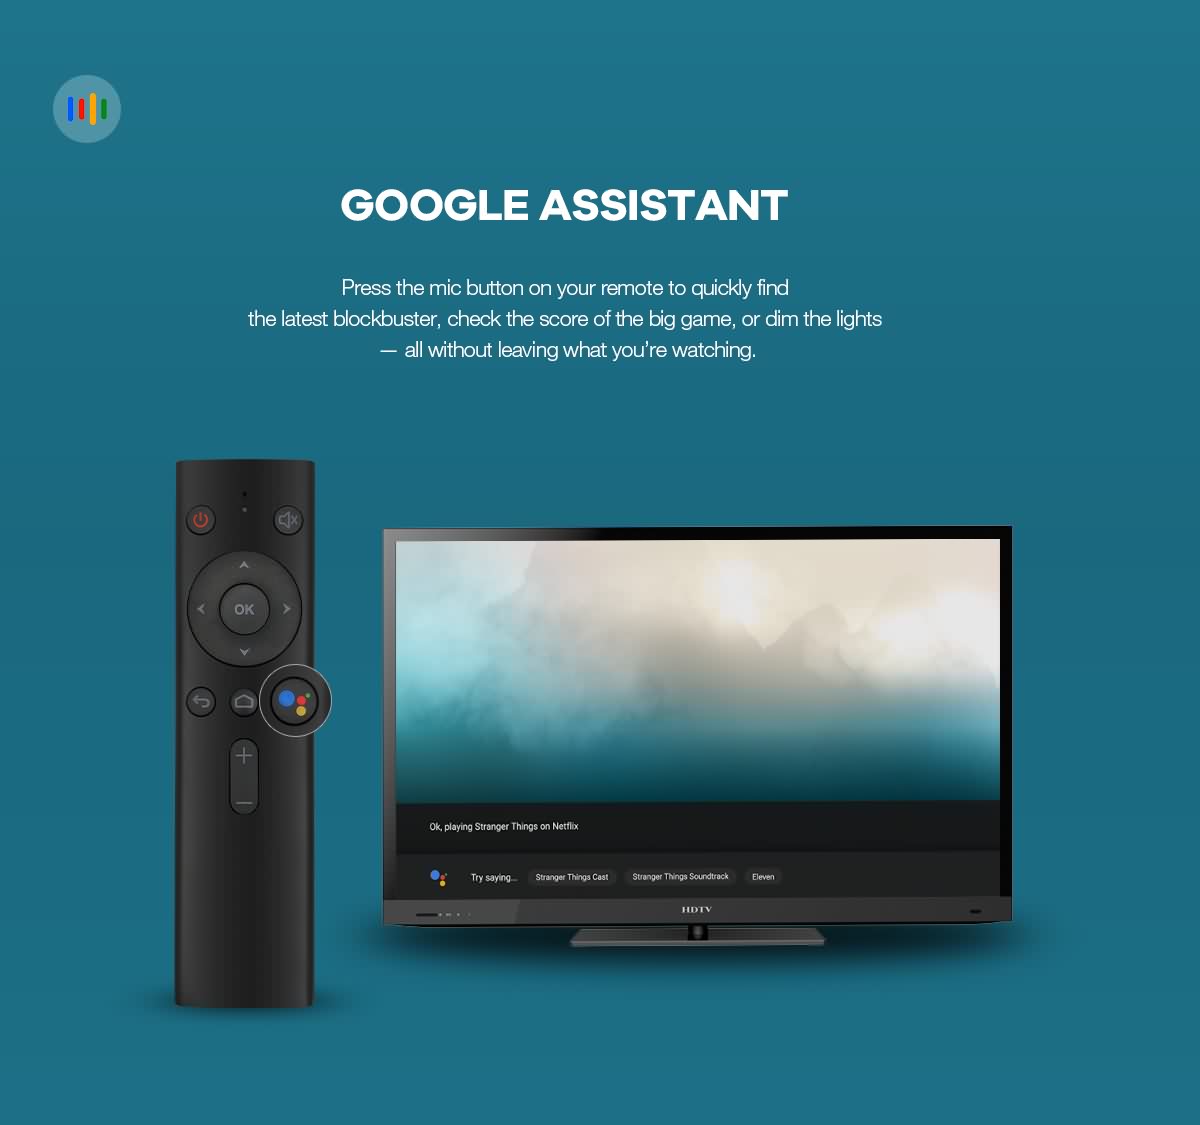 Pure OTT androidtv™ 9.0/10.0 OTT Box with Google certificate based on Amlogic S905X chipset 4